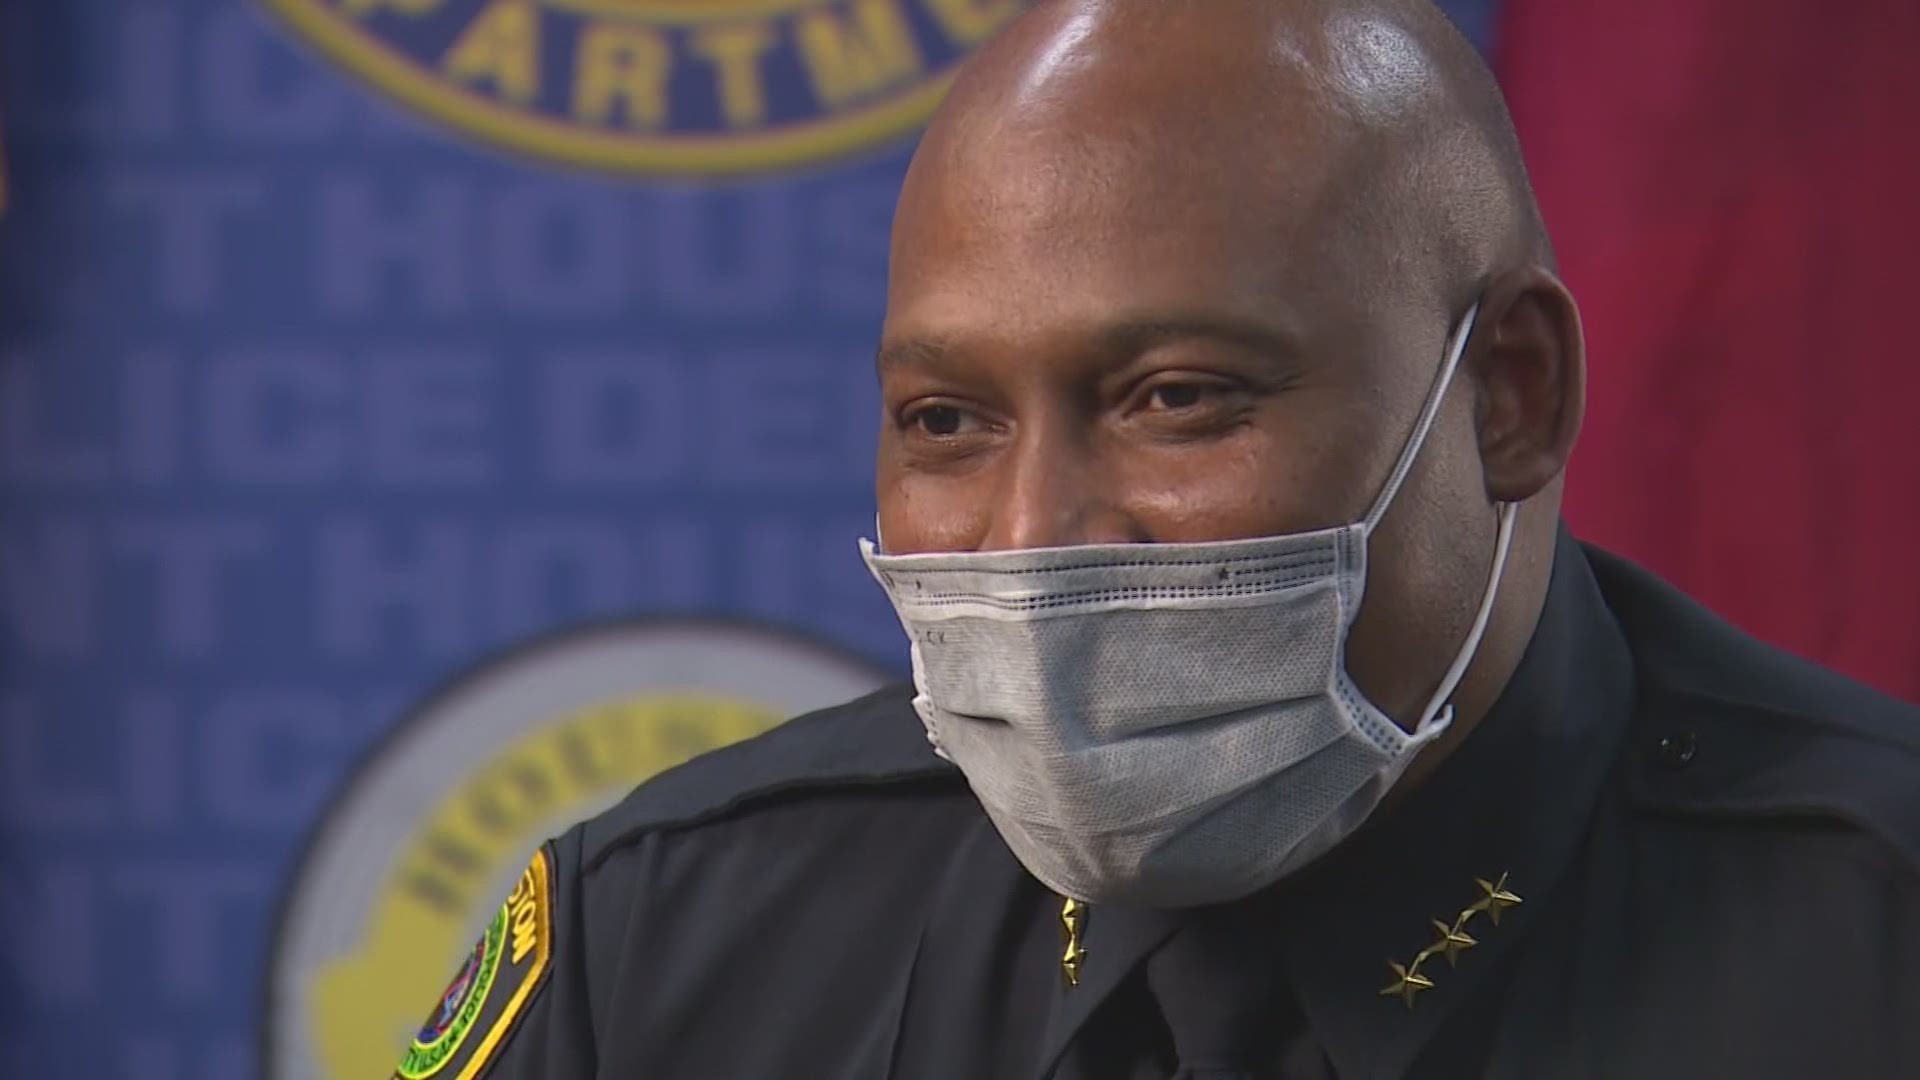 KHOU 1 anchor Len Cannon went one-on-one with Troy Finner, the next chief to lead the Houston Police Department.